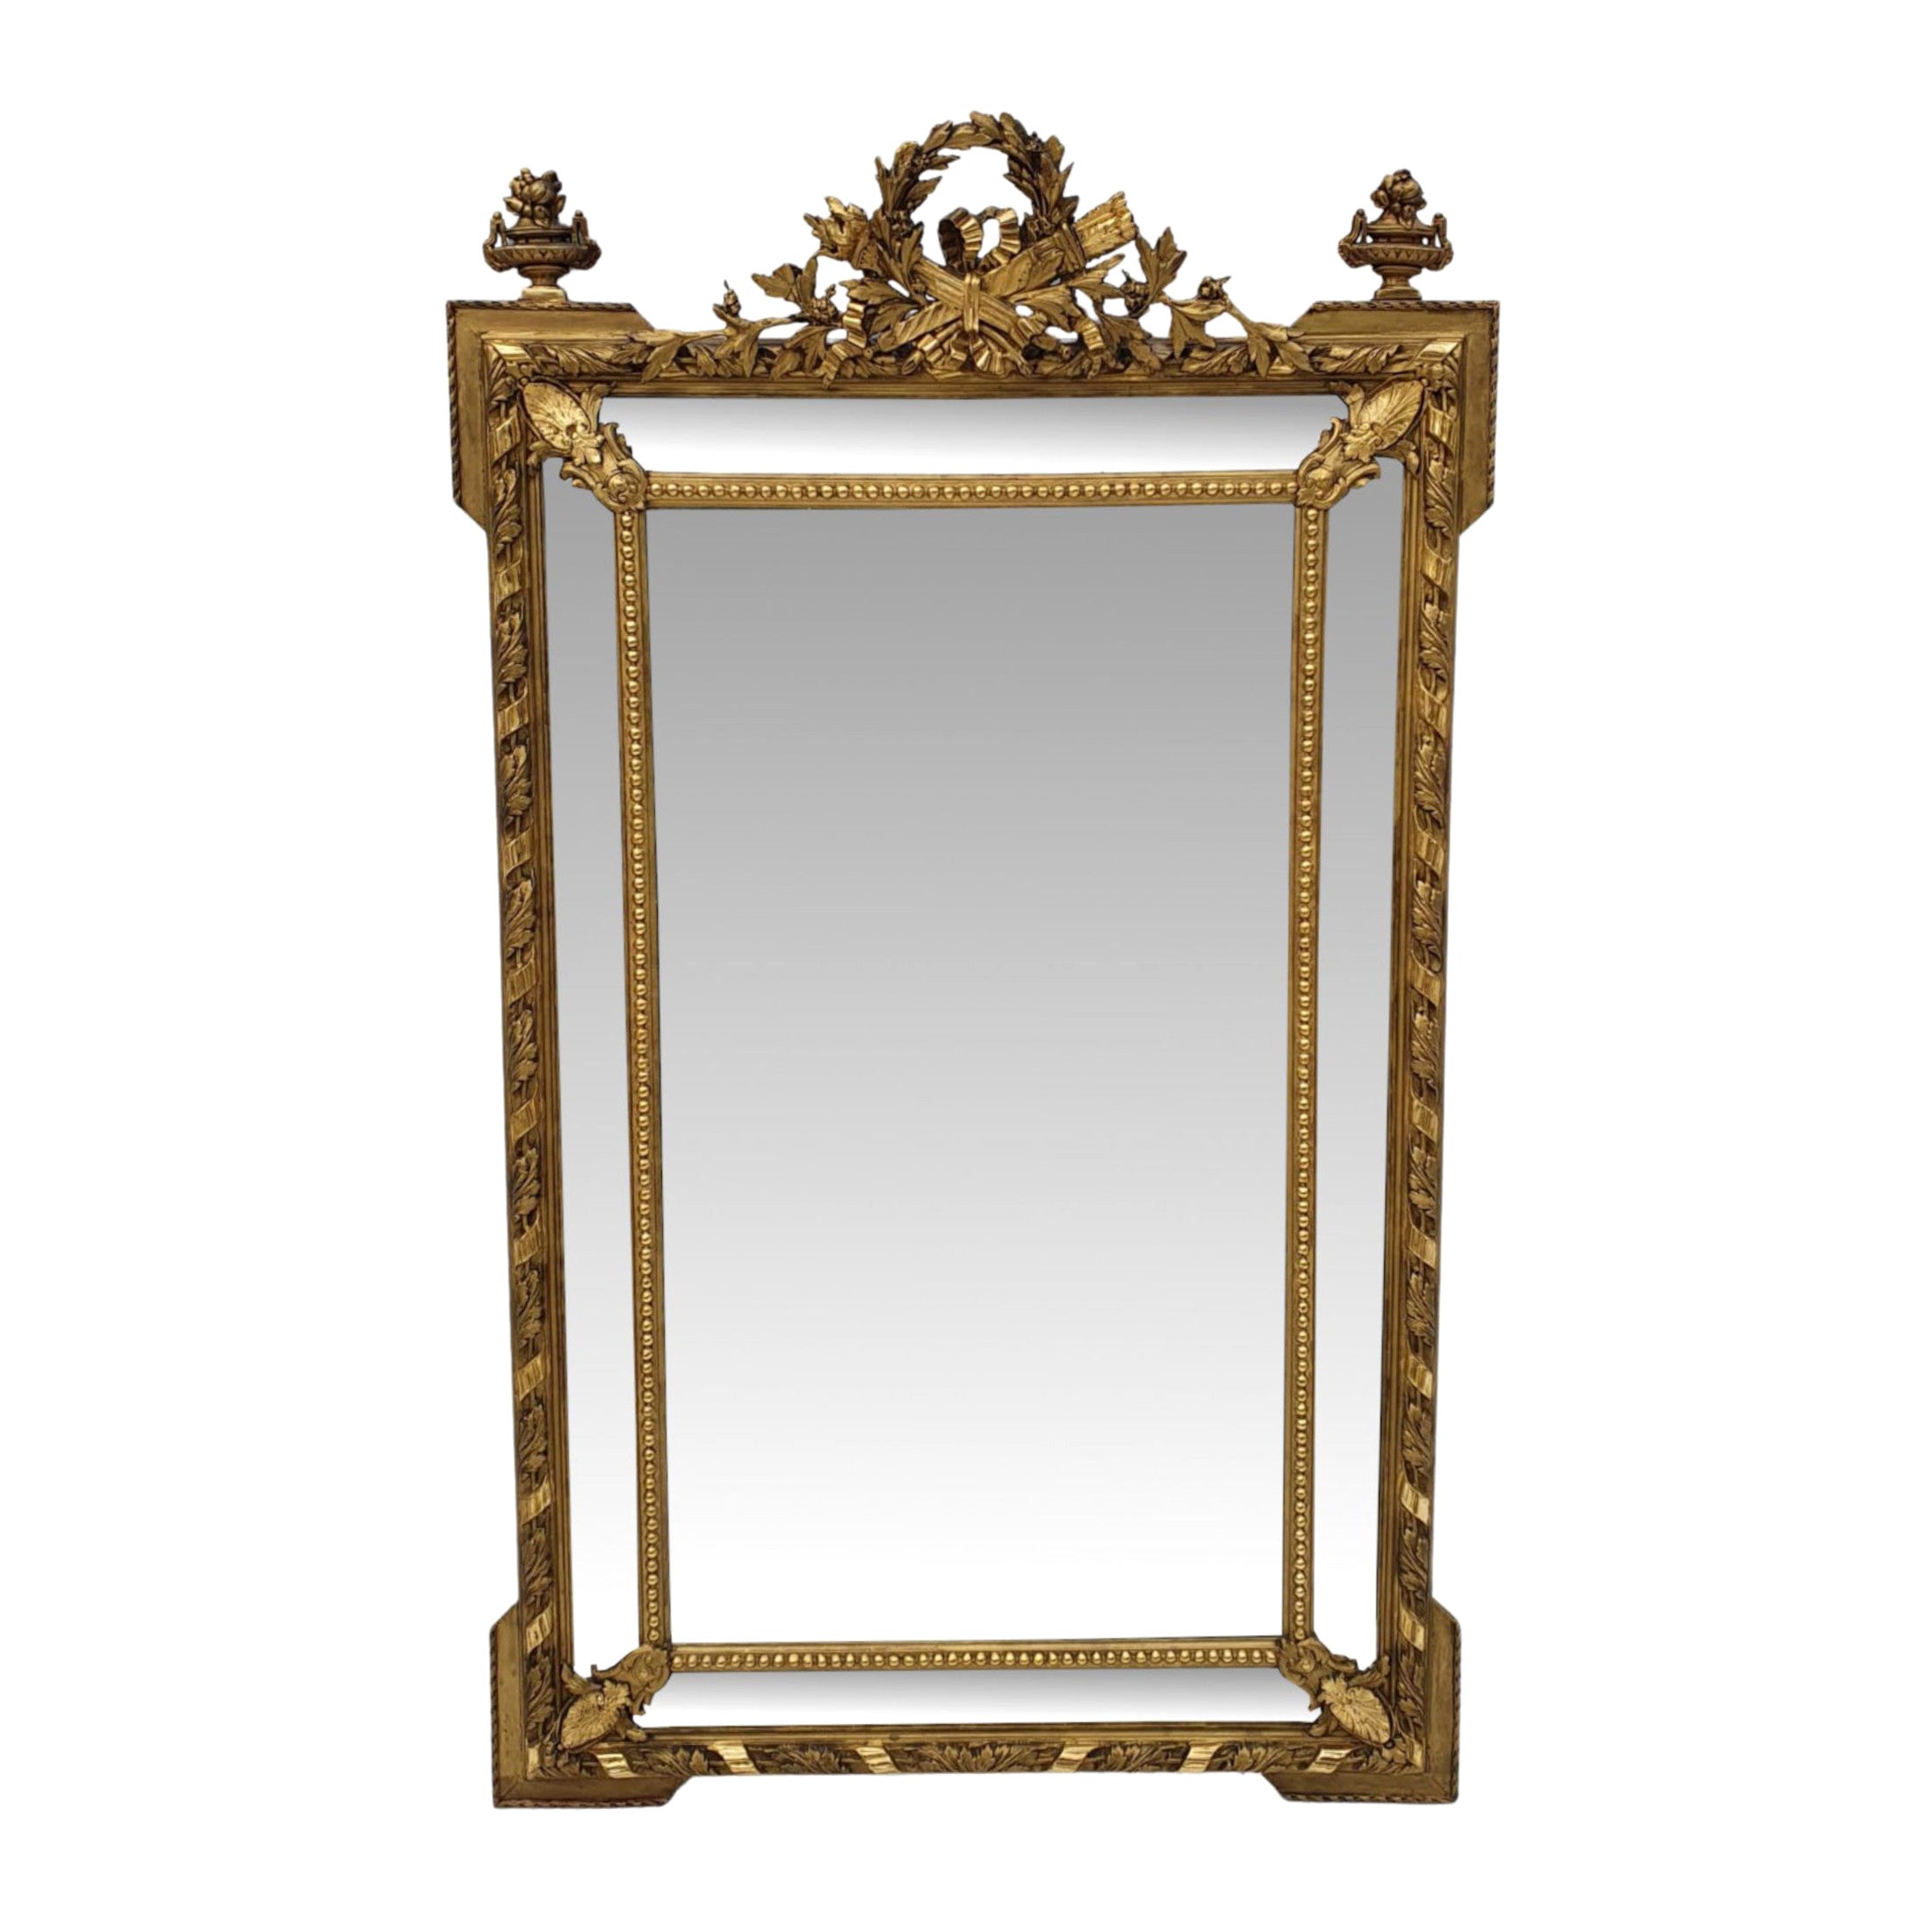 Very Fine Large 19th Century Giltwood Margin Overmantle or Hall Mirror For Sale